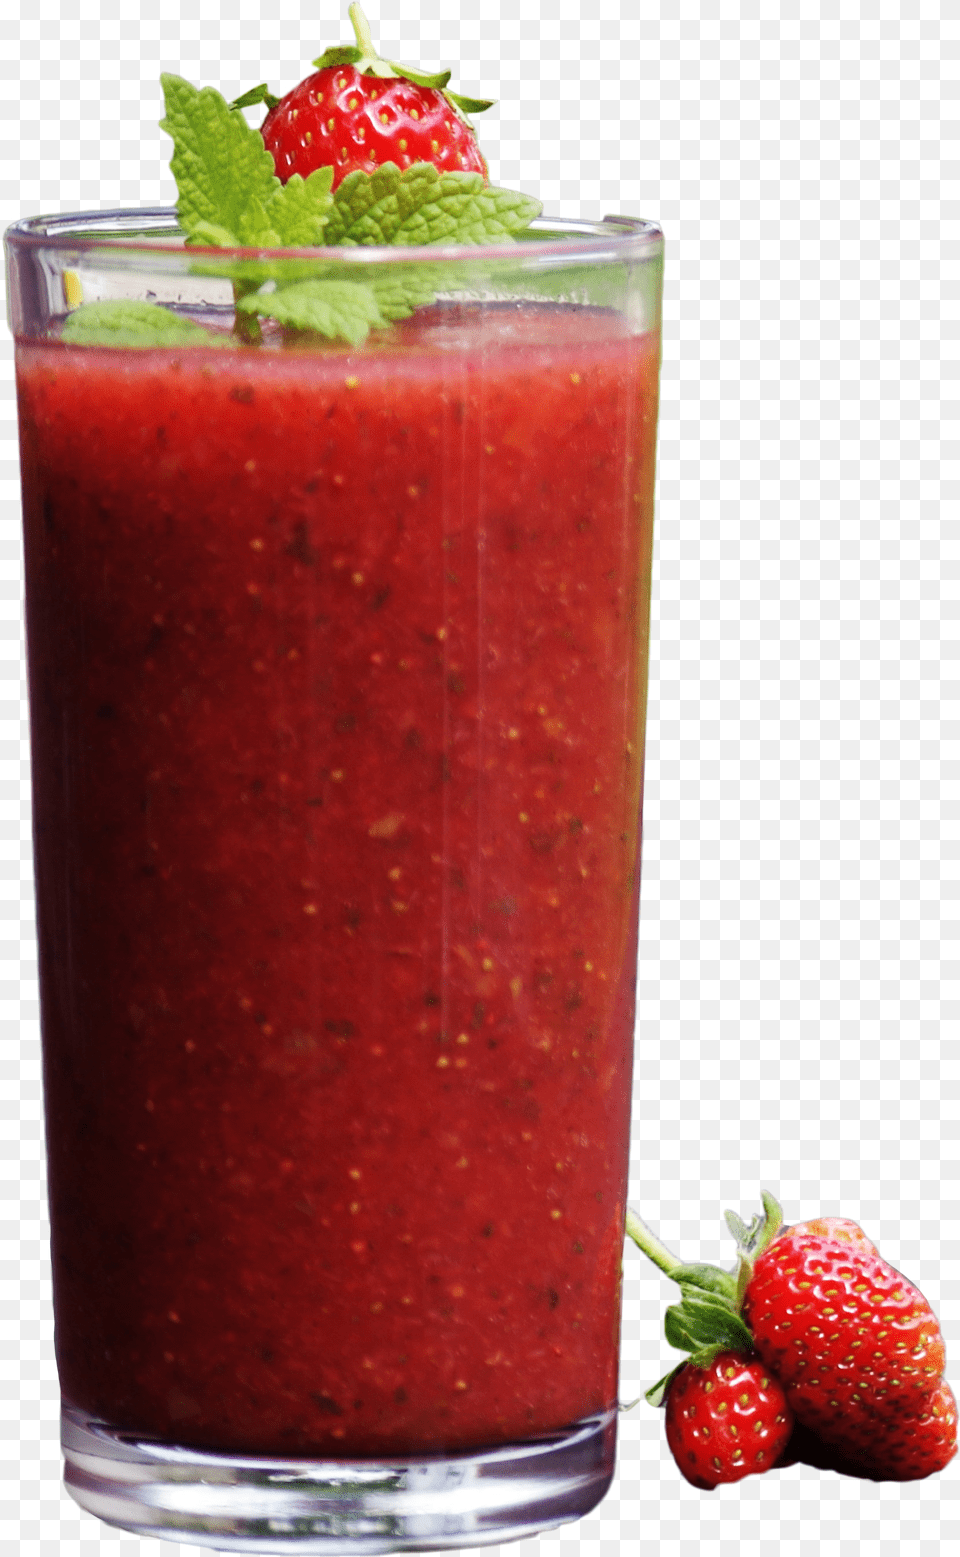 Smoothie Fruit Strawberry Image For Transparent Background Smoothie Clipart, Berry, Produce, Plant, Juice Png